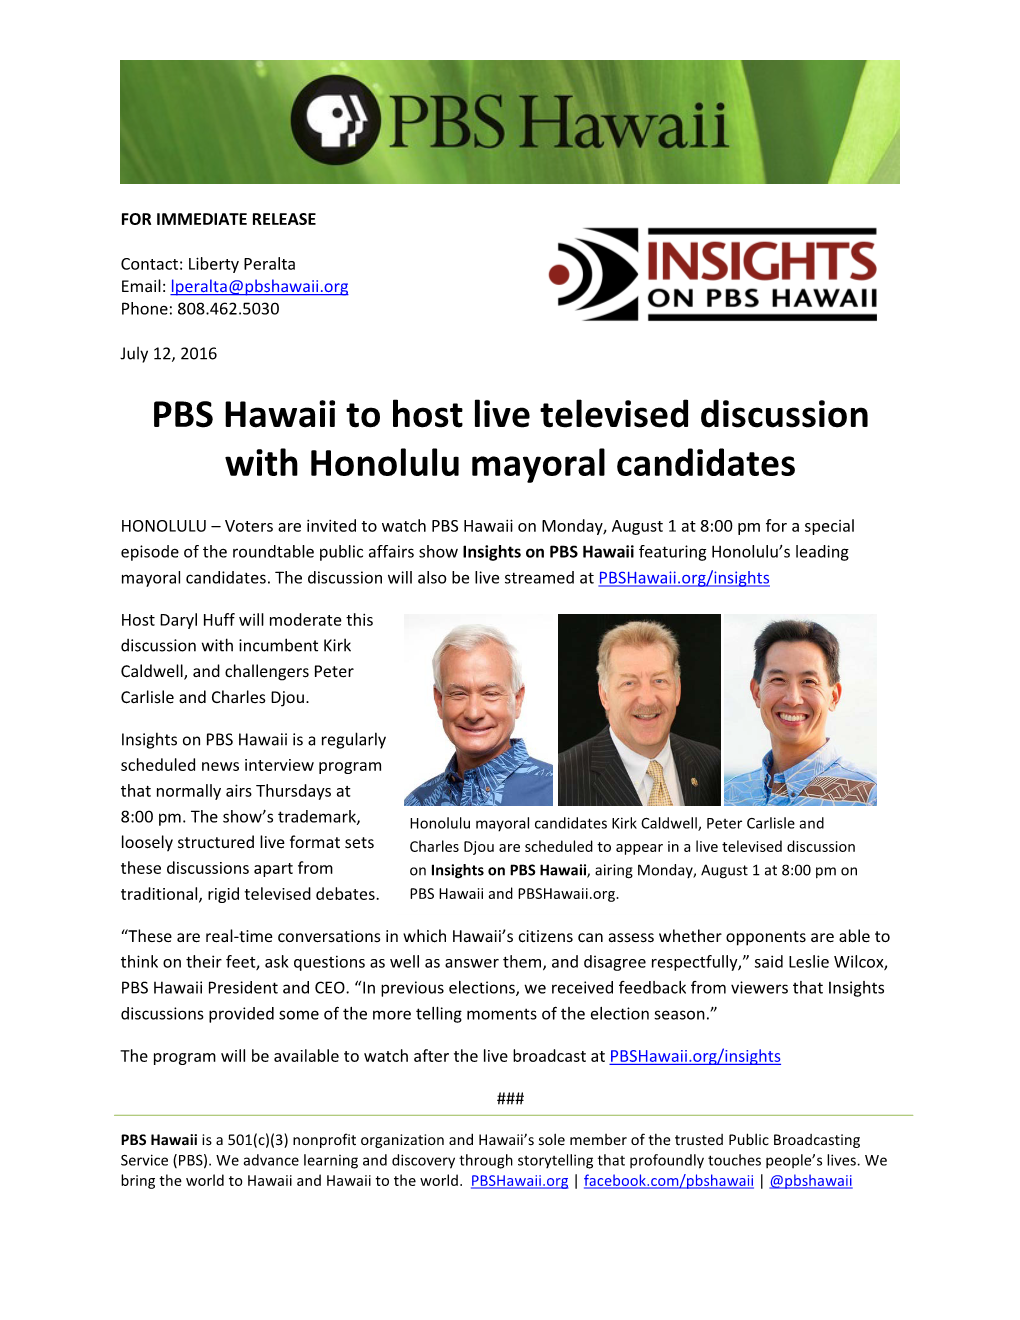 PBS Hawaii to Host Live Televised Discussion with Honolulu Mayoral Candidates